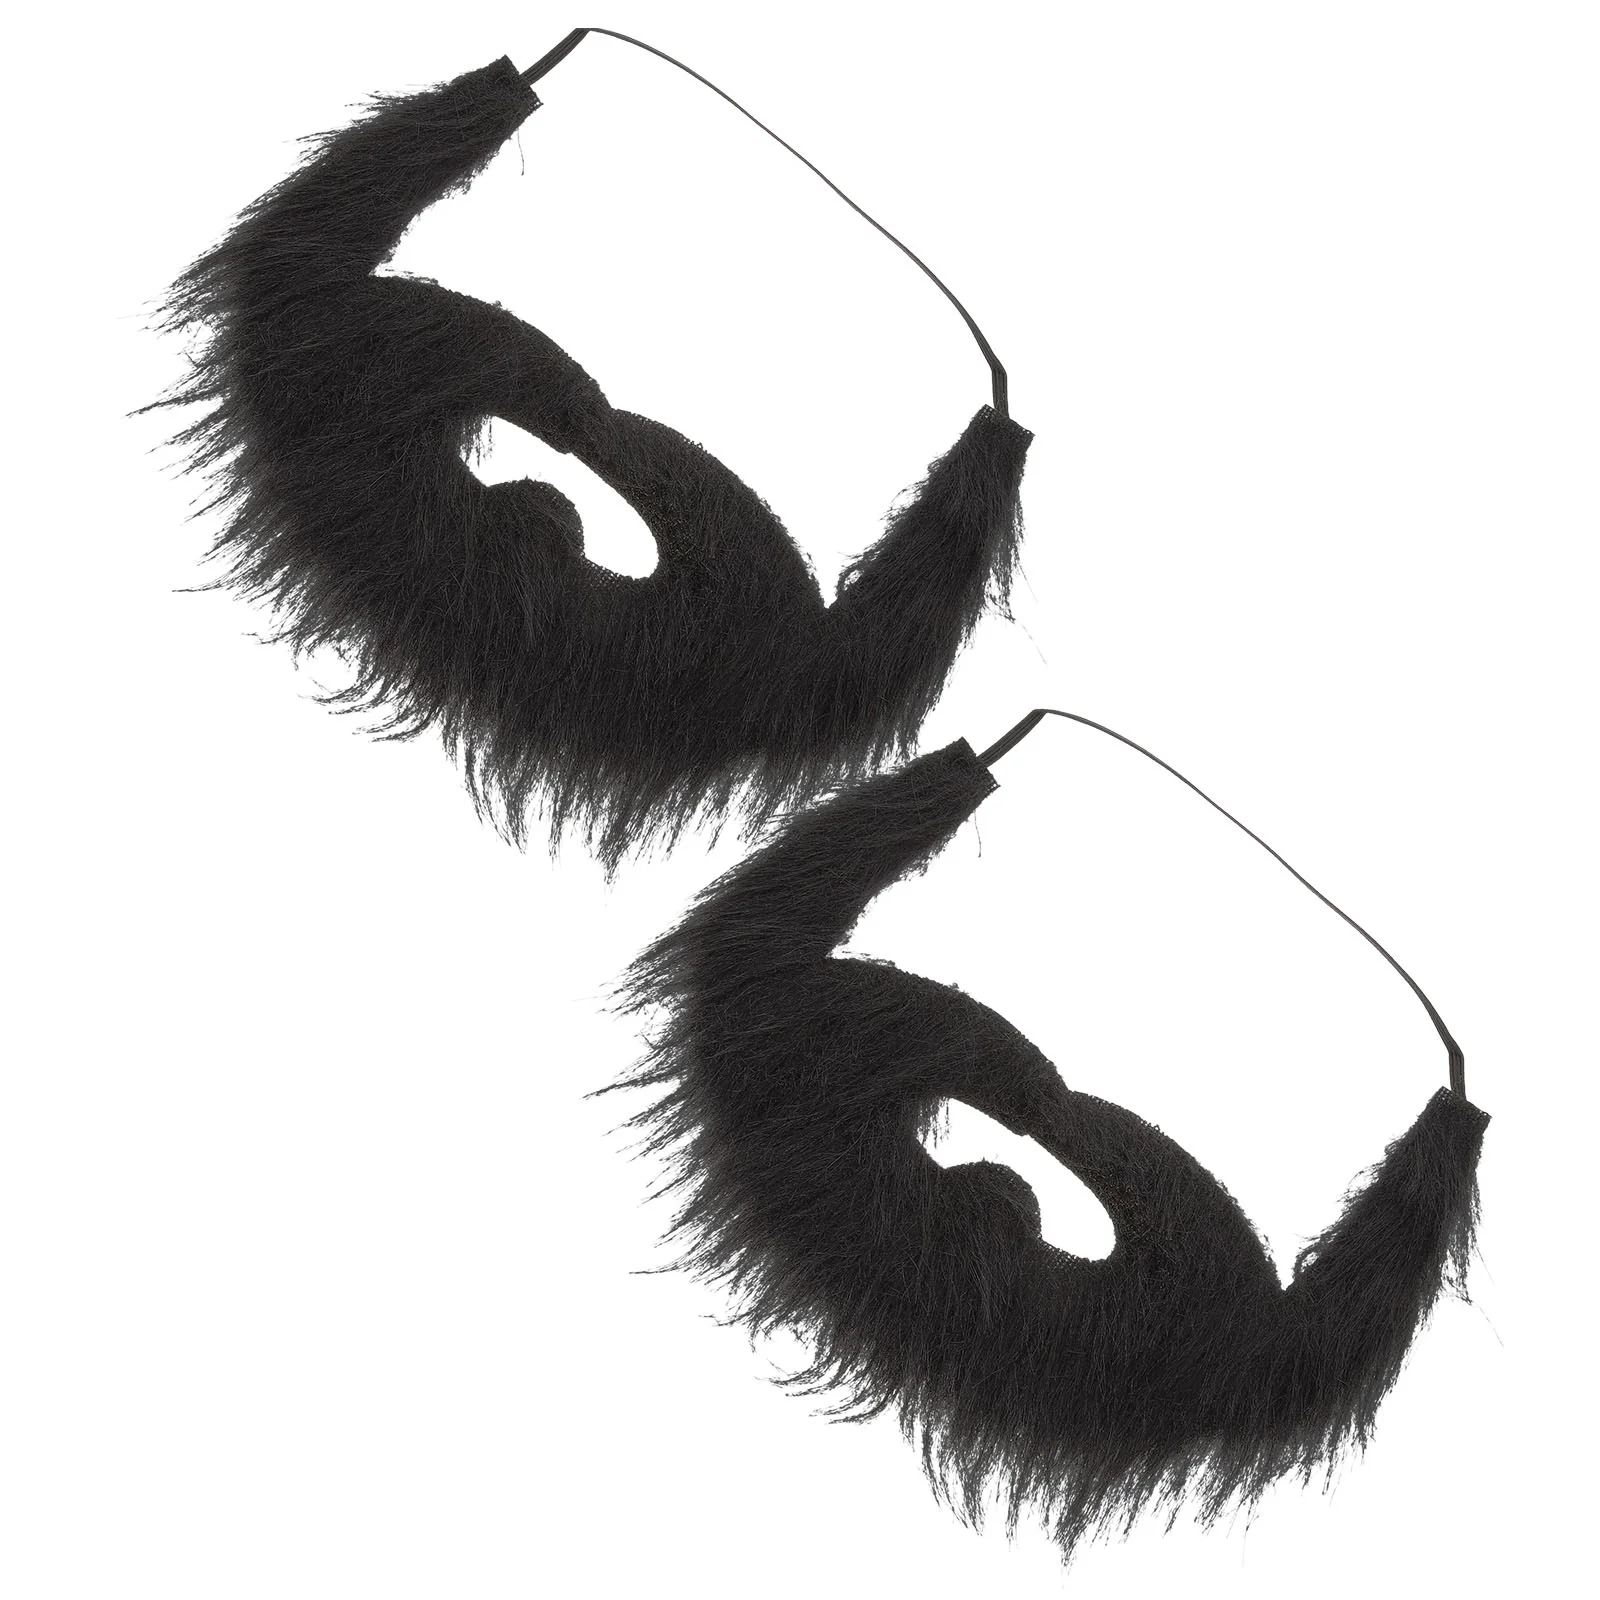 

Fake Beard Lint Cosplay Supply Carnival Prop Photo Props Decorative Mustache Movie Prom False